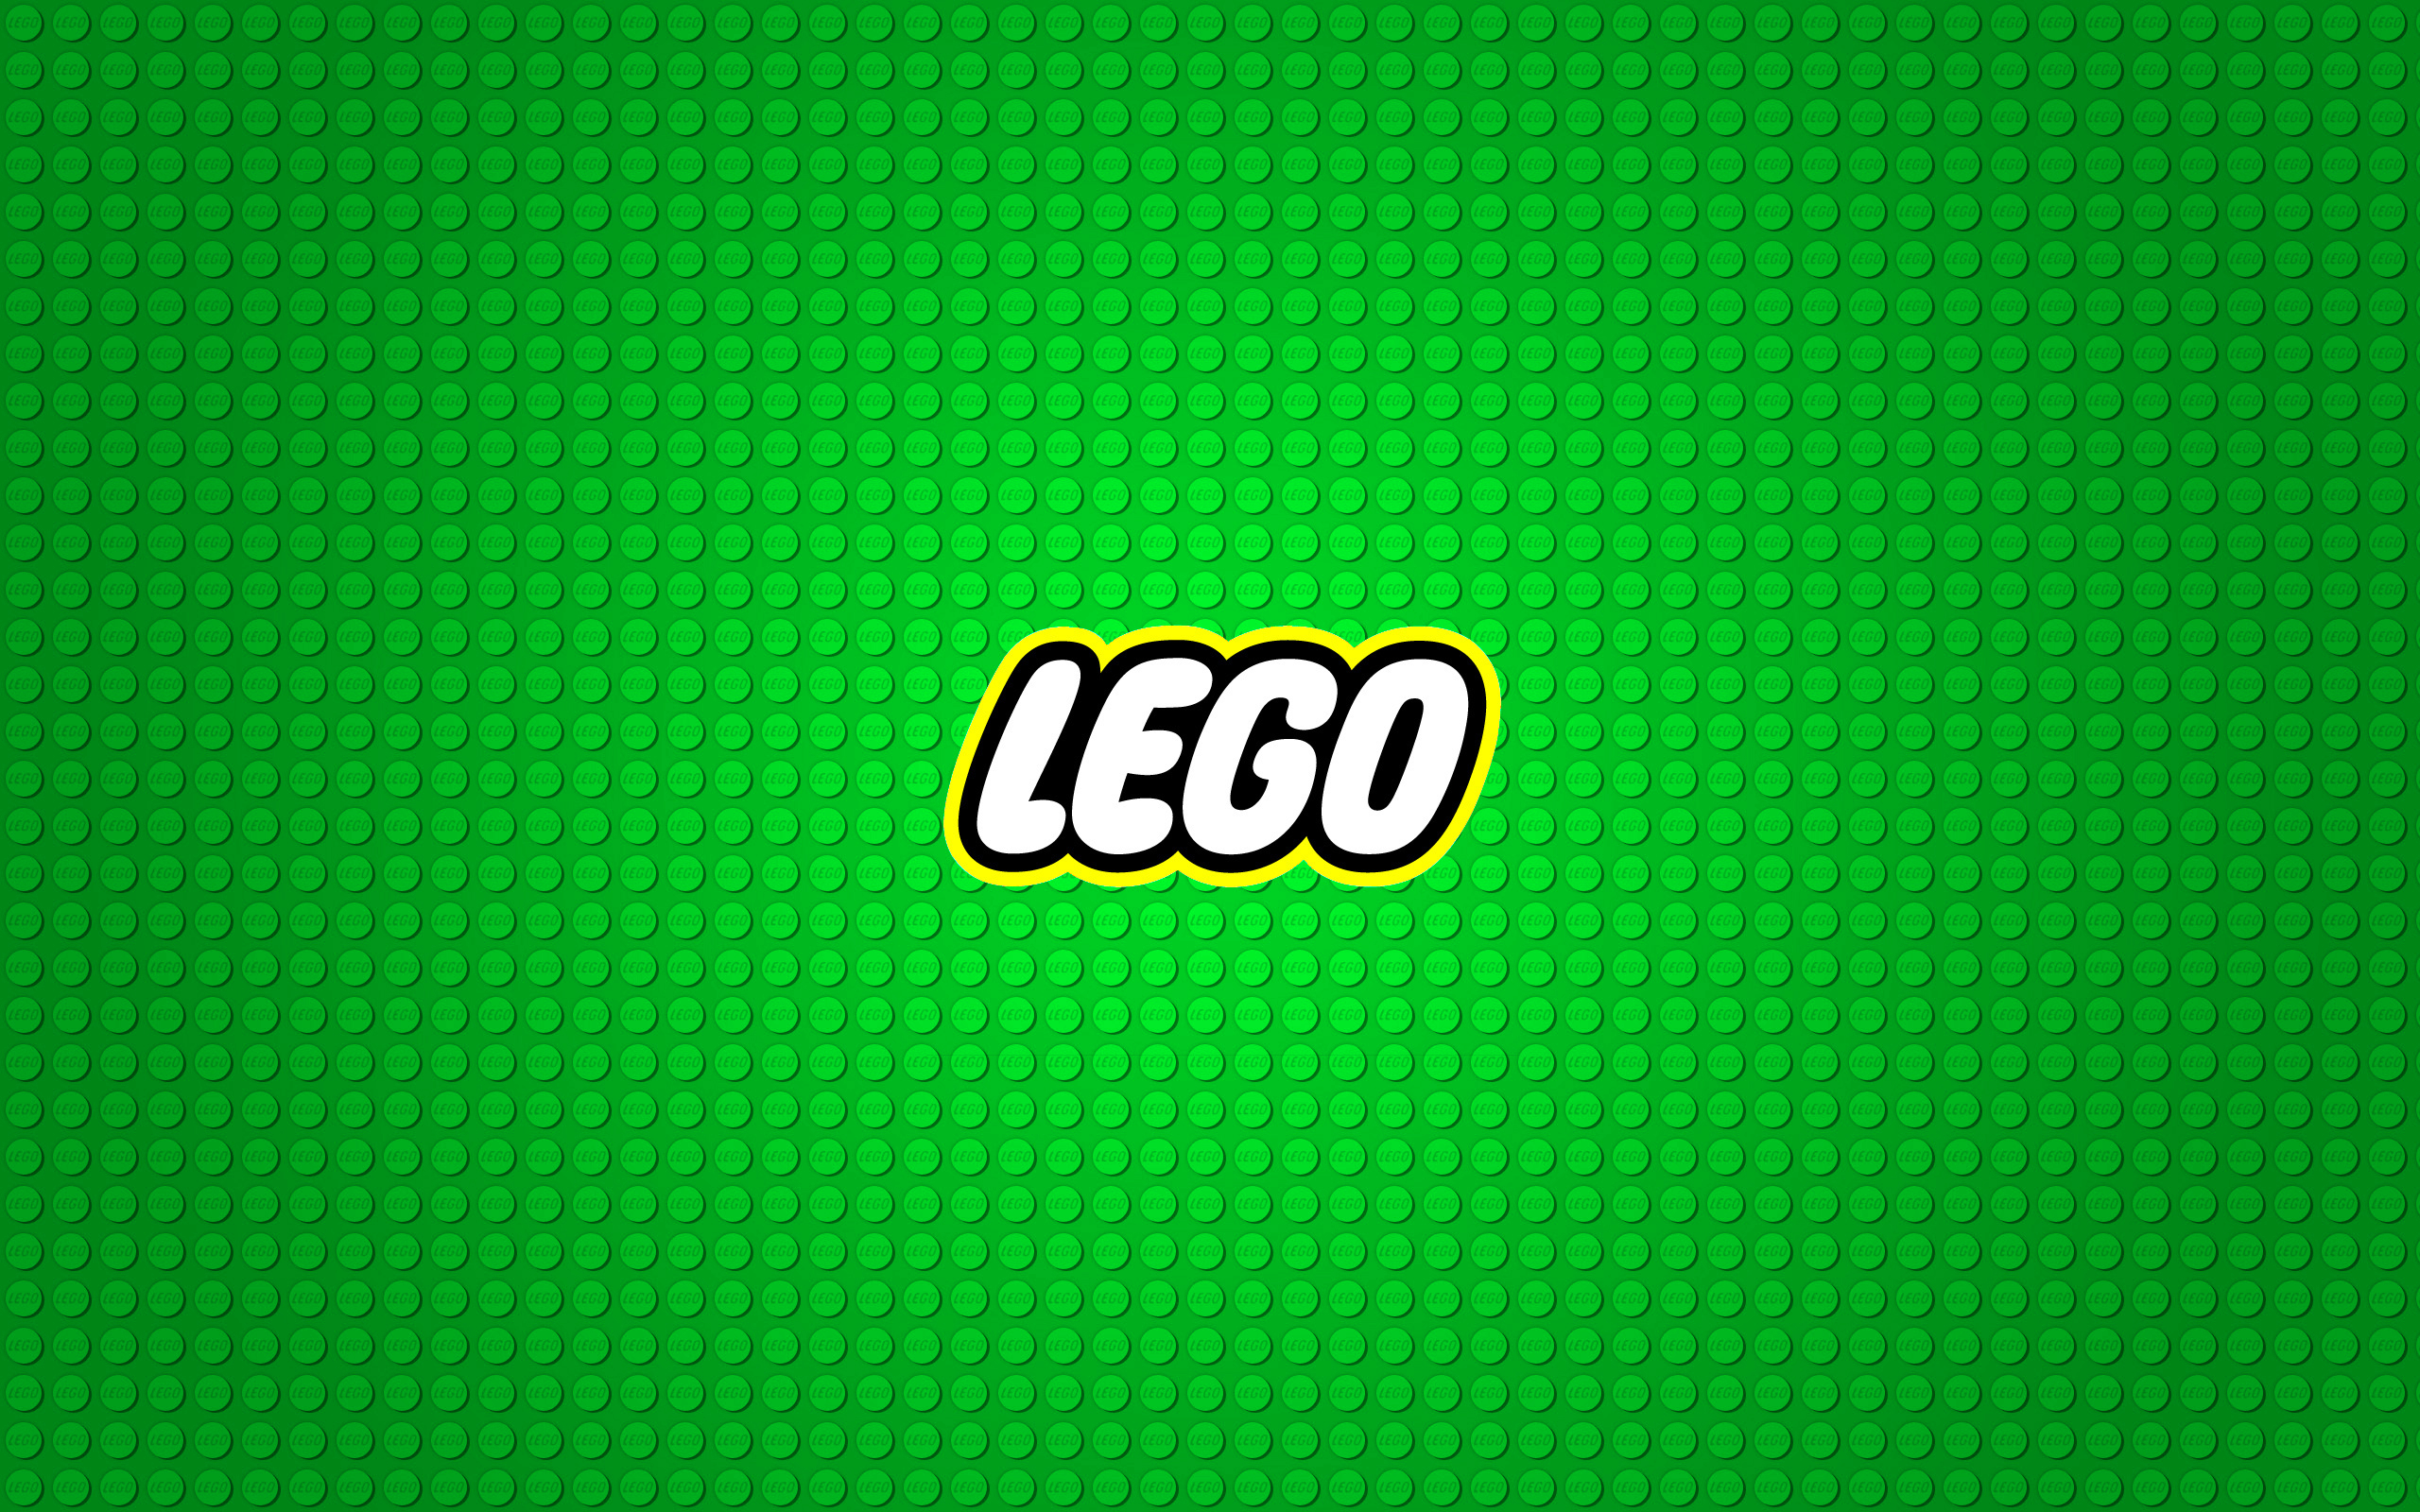 Lego Logo Wallpaper [I can change the background color to just ...